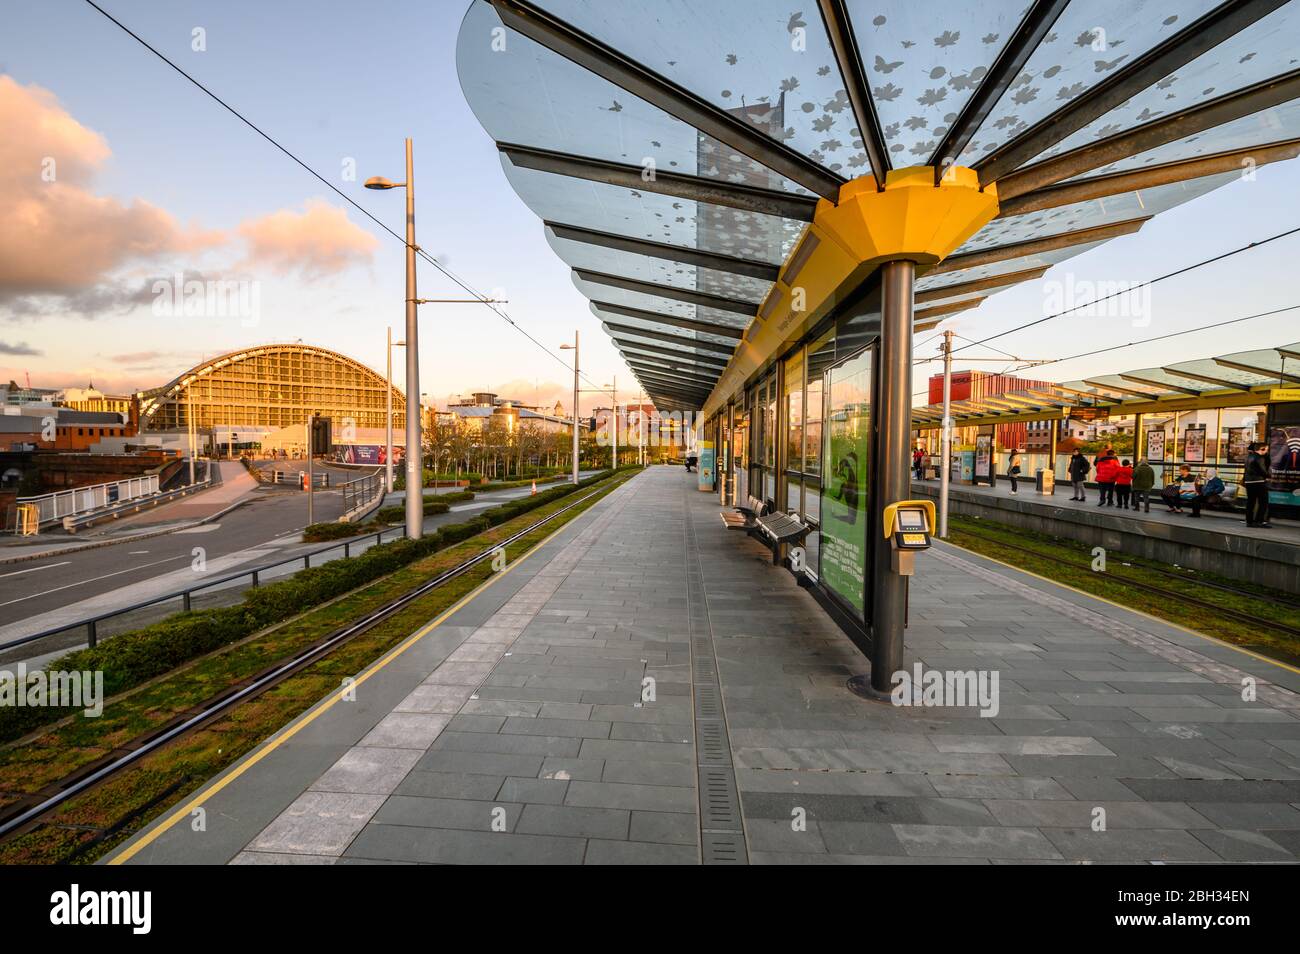 DEANSGATE CASTLEFIELD MANCHESTER-OCTUBER 27, 2019: A tram  to stop at deansgate Station. Stock Photo